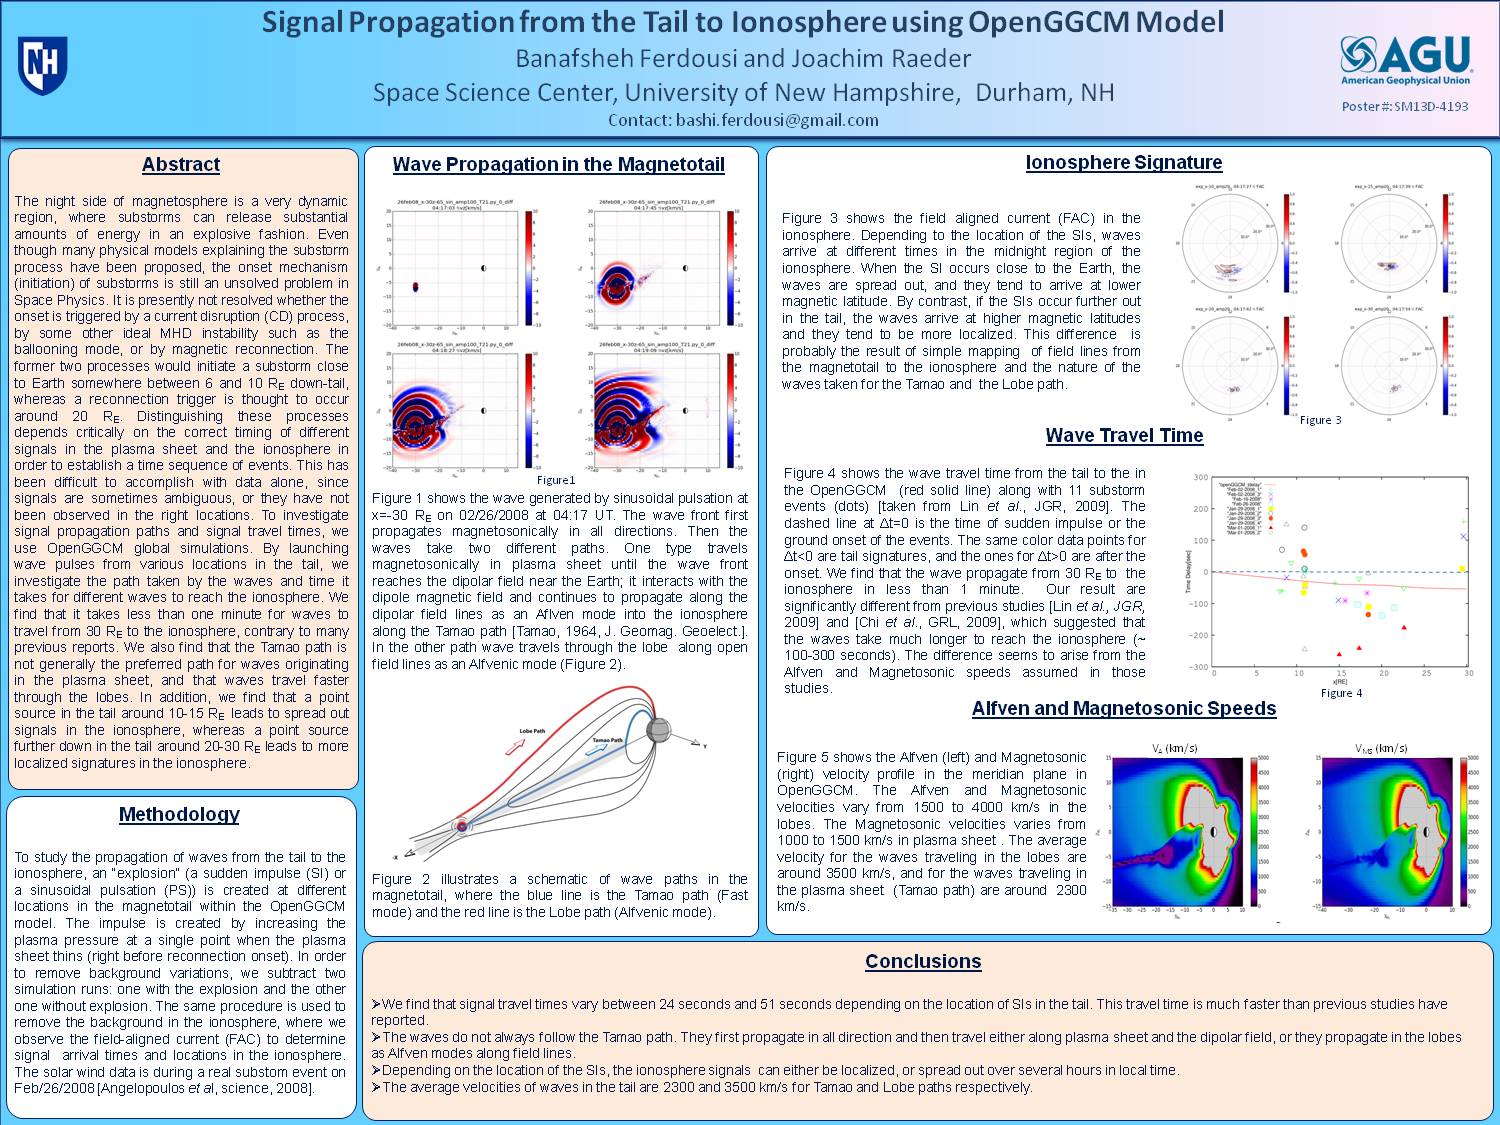 Signal Propagation From The Tail To Ionosphere Using Openggcm Model by bferdousi